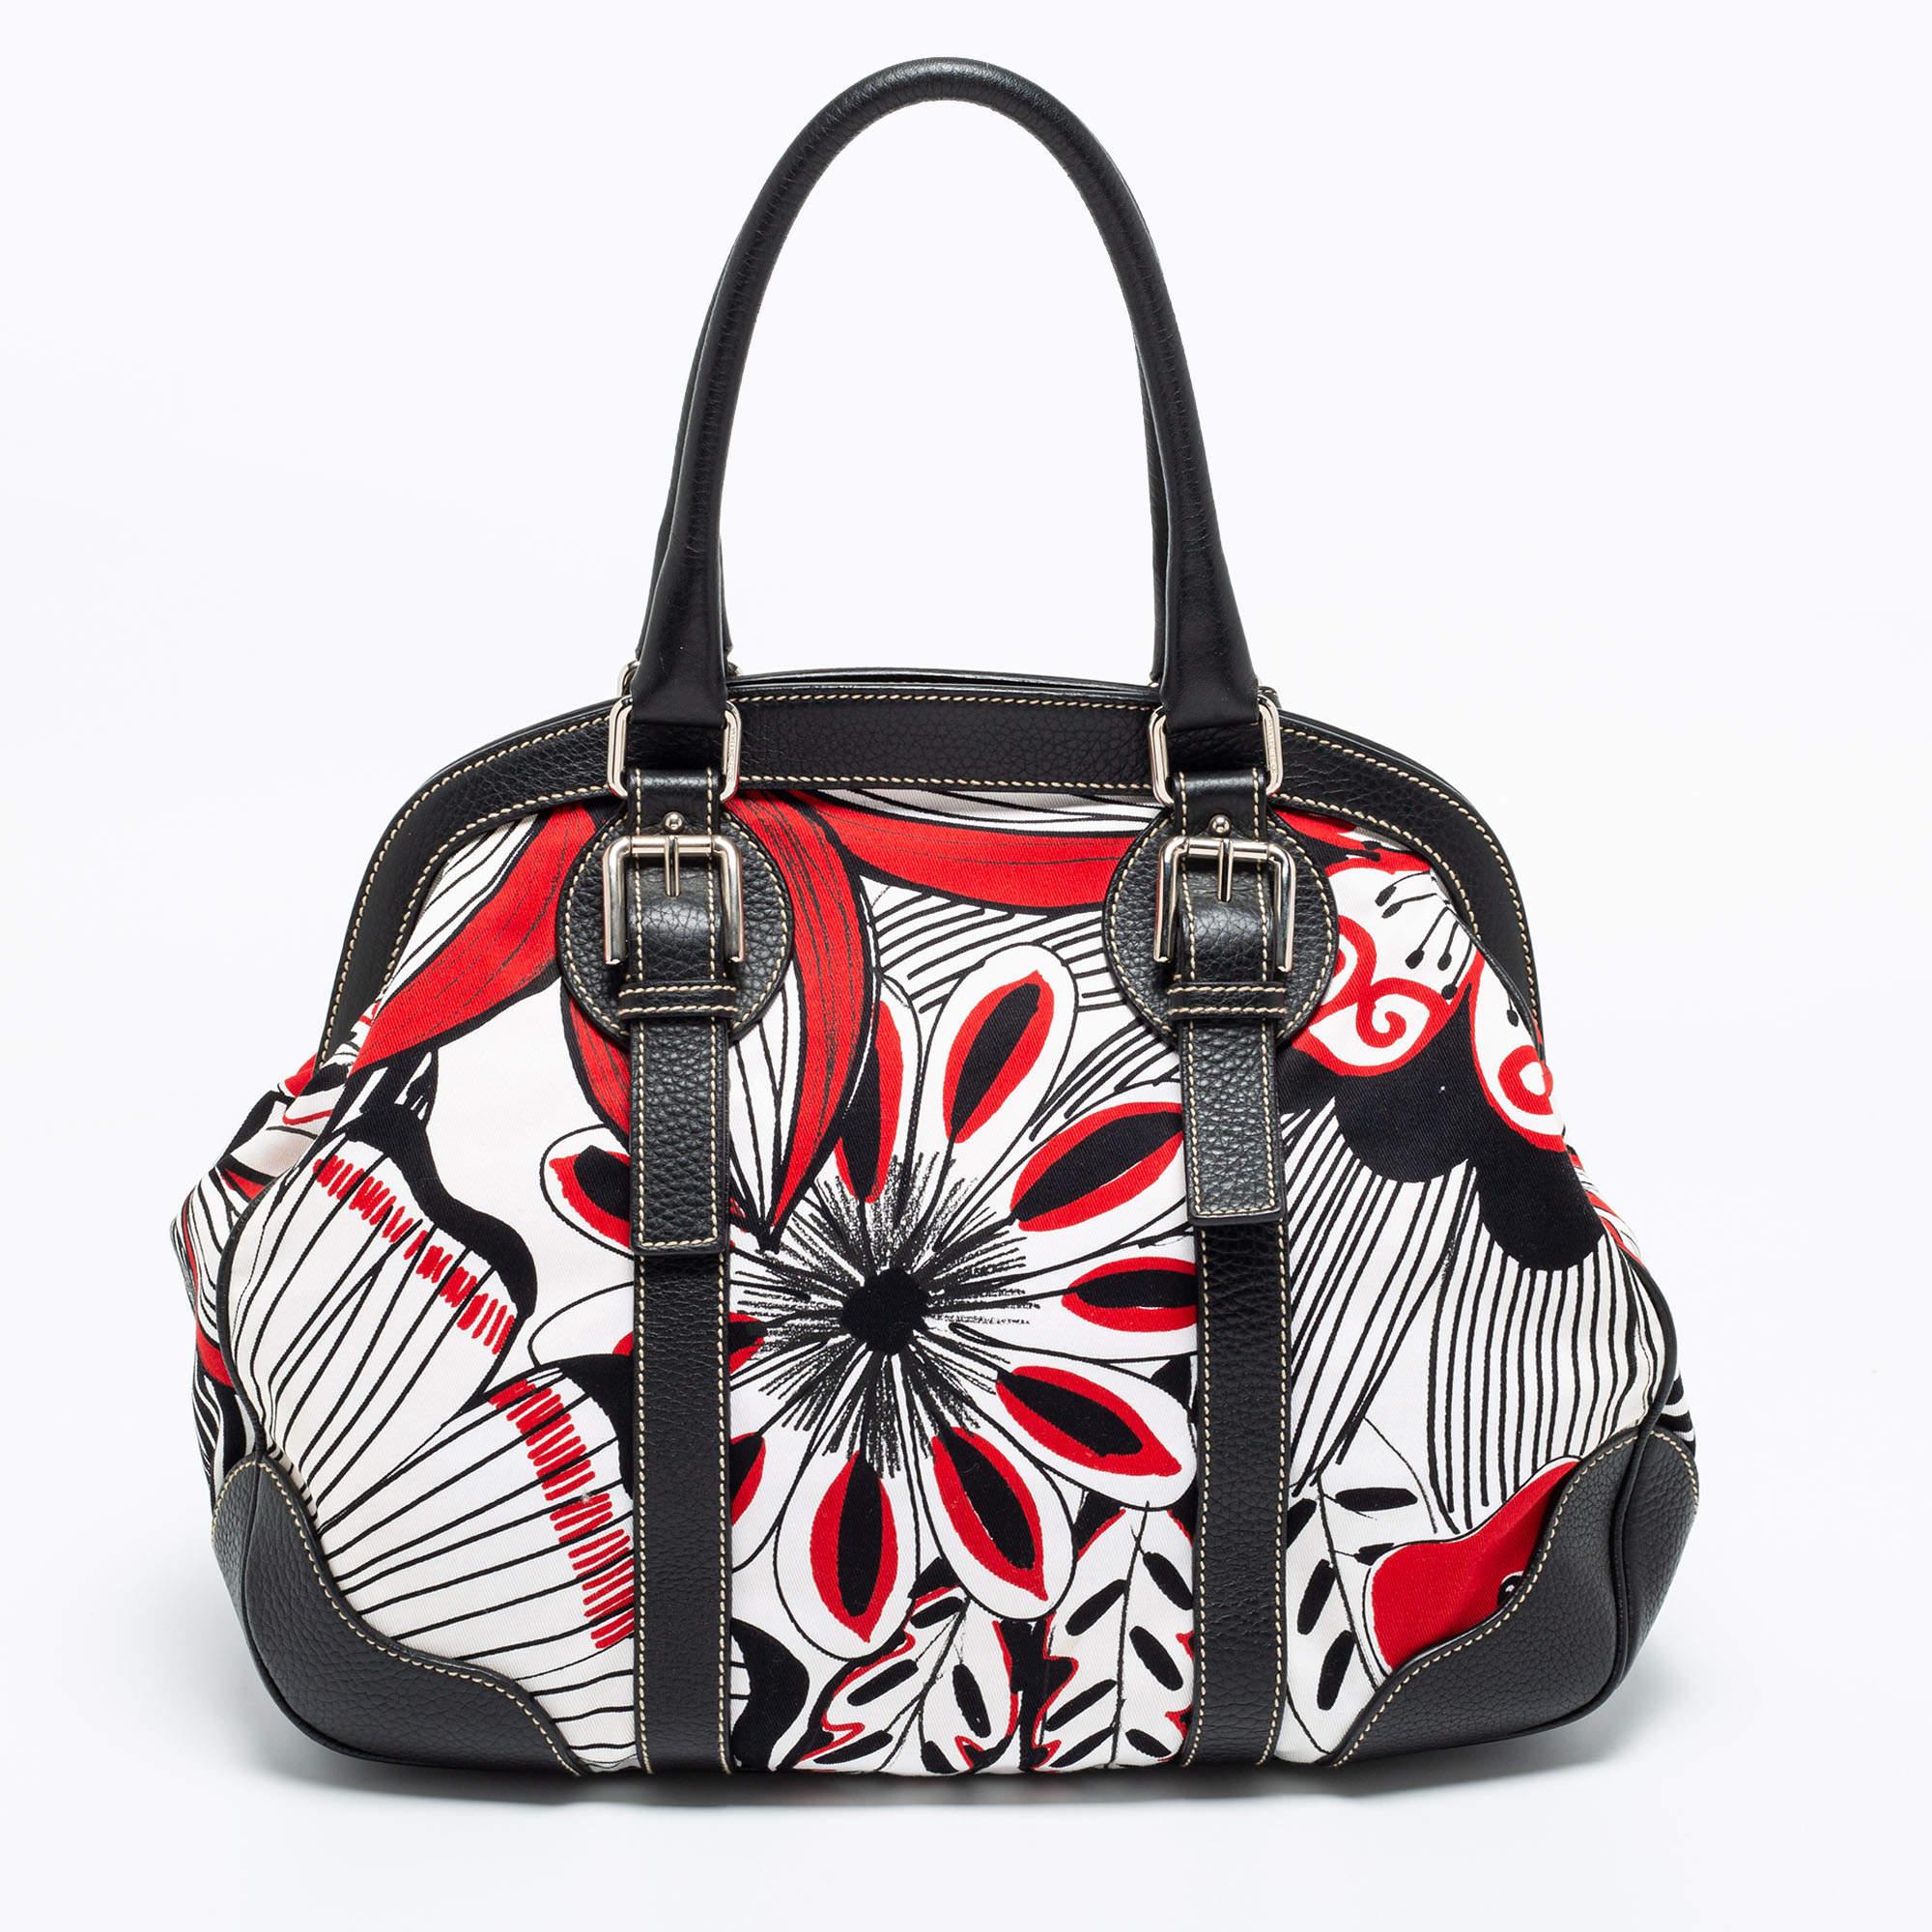 Made from printed canvas and leather trims and equipped with a smooth fabric interior, this white-black tote can effortlessly be fashioned with casual looks. The excellent craftsmanship of this Dolce & Gabbana bag ensures a brilliant finish and a